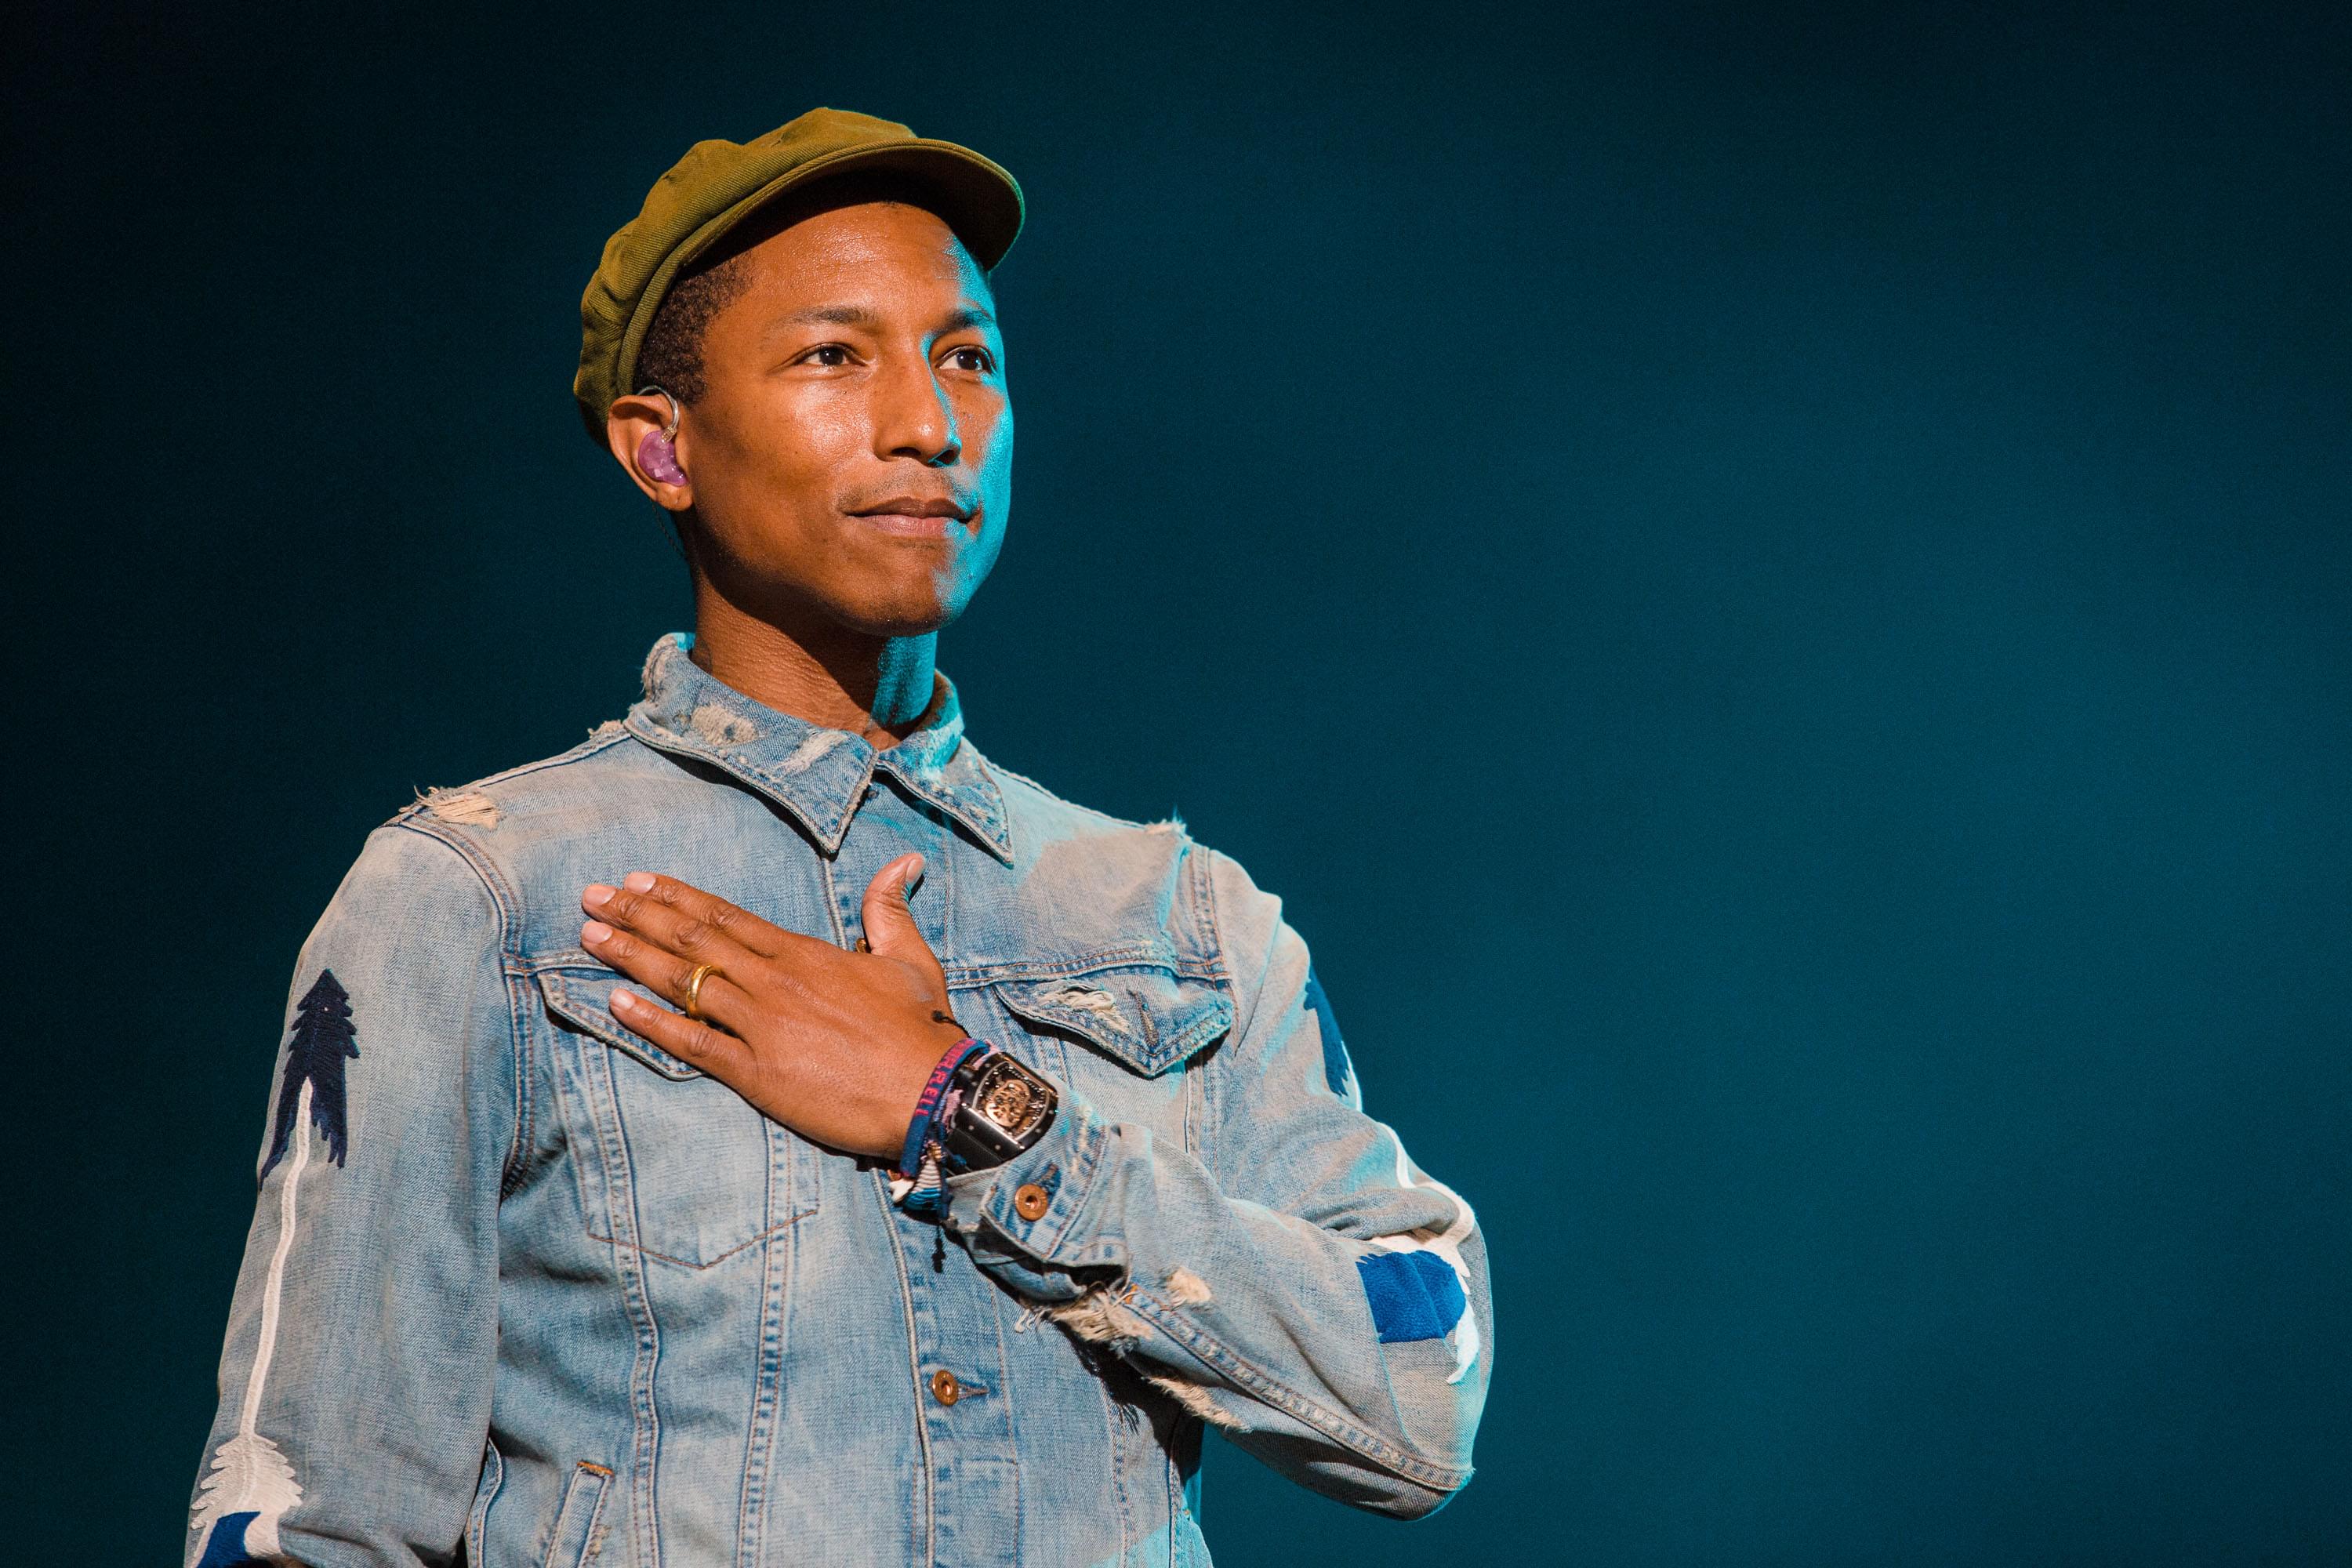 WATCH Pharrell Get Video Gamed In His New Music Video “Yellow Light”